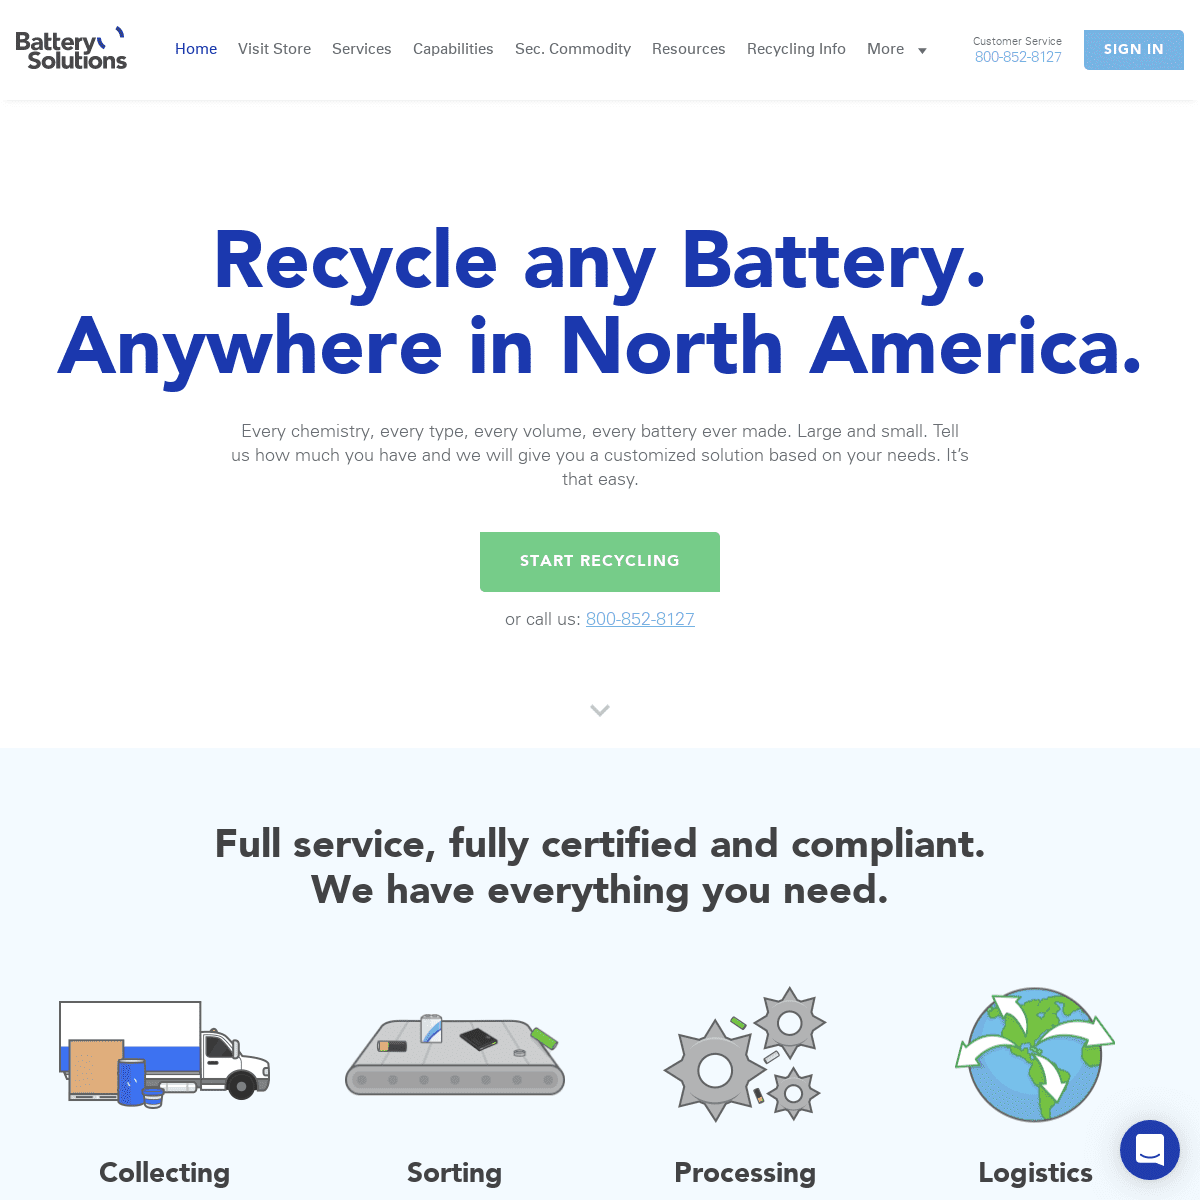 Battery Solutions | Recycle any Battery. Anywhere in North America.